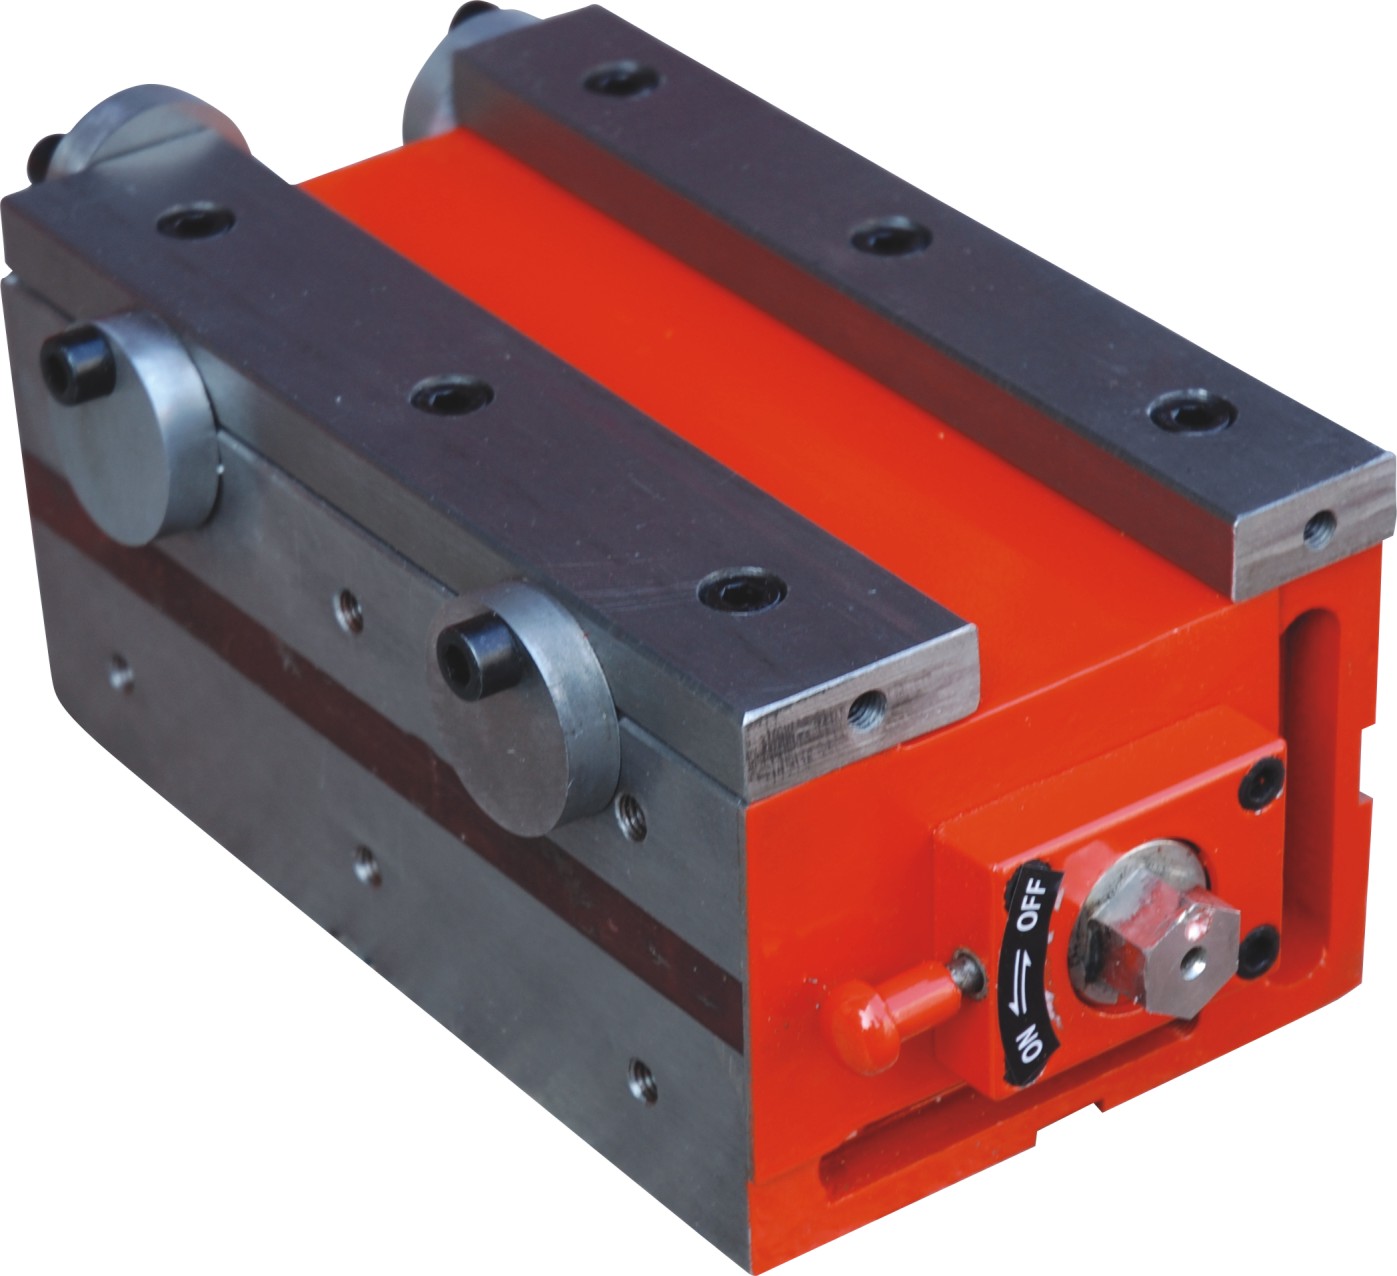 DYT Permanent Magnetic Workholding